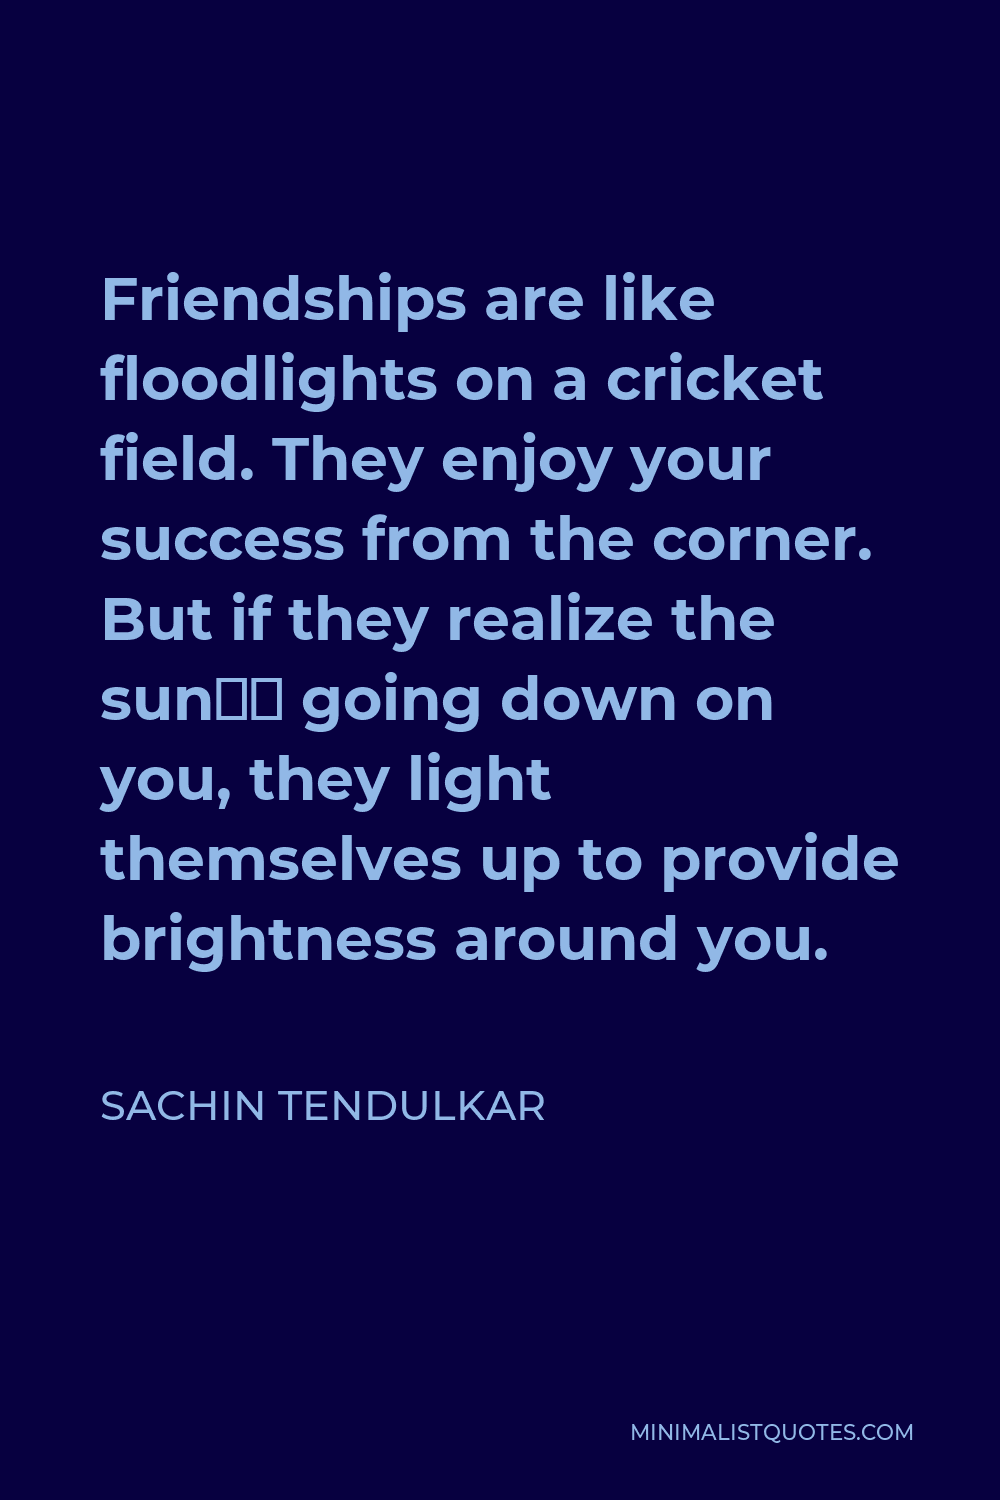 Sachin Tendulkar Quote - Friendships are like floodlights on a cricket field. They enjoy your success from the corner. But if they realize the sun’s going down on you, they light themselves up to provide brightness around you.